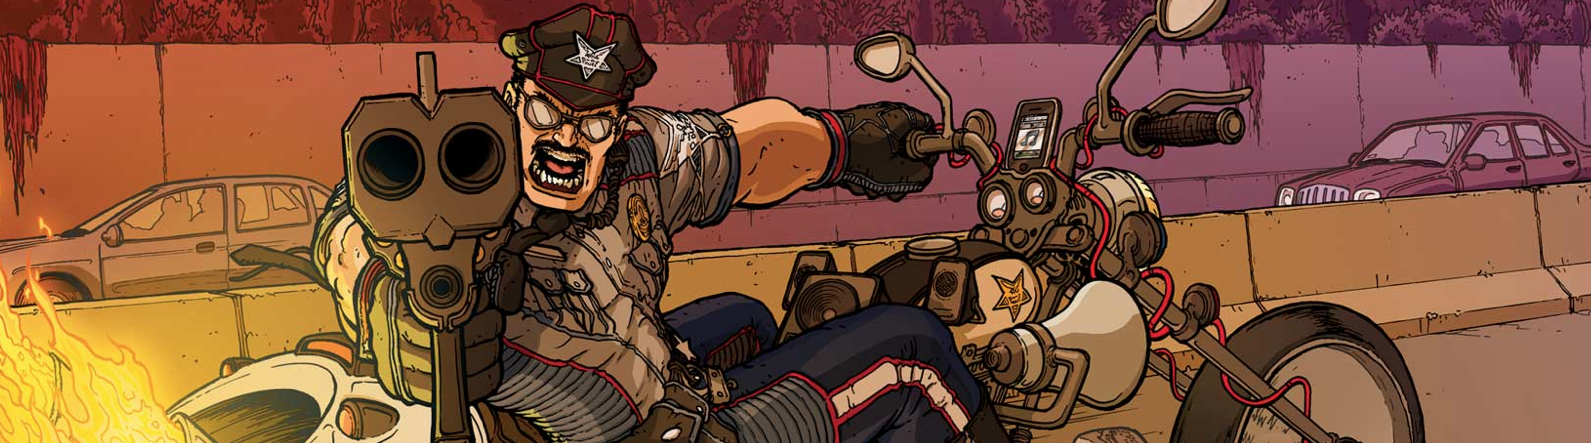 Officer Downe: Crahan introduces his comic adaptation